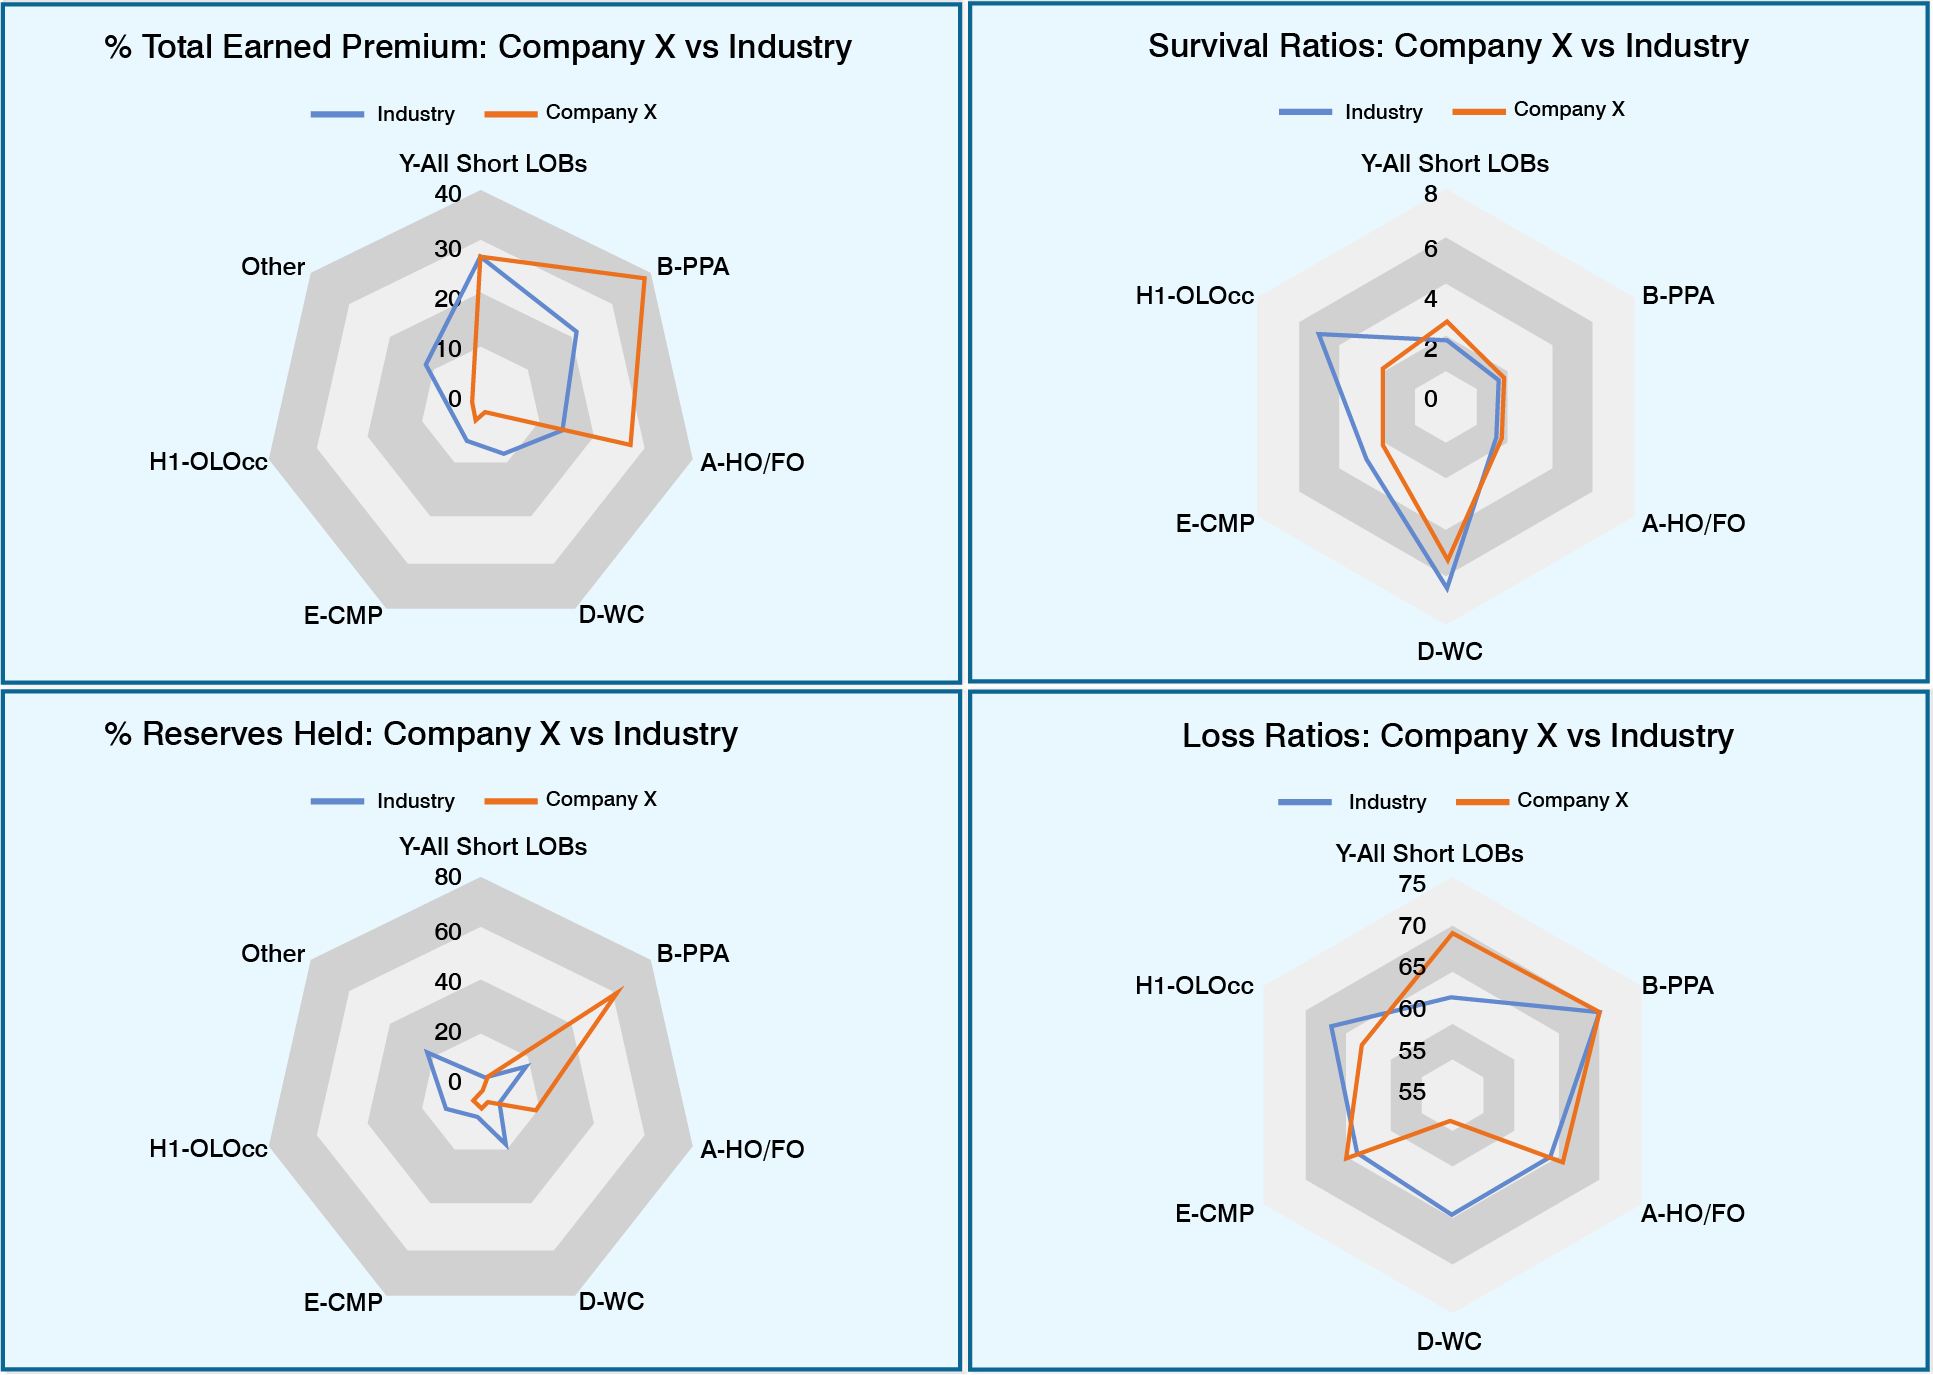 Company X snapshot of various statistics (% Total Earned Premium; Survival Ratio; Proportion Reserves Held and Loss Ratios